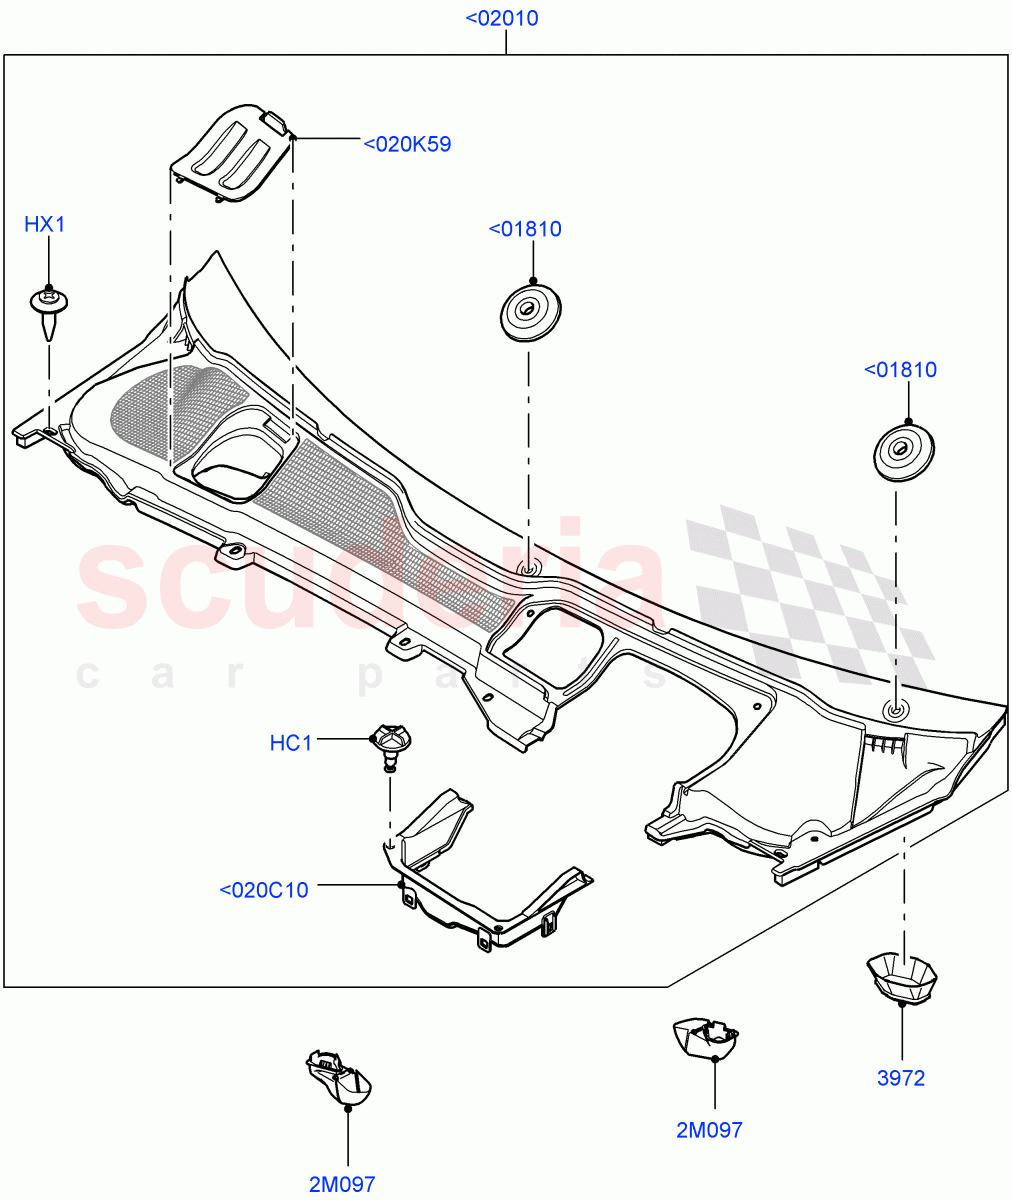 Cowl/Panel And Related Parts(Changsu (China))((V)FROMEG000001) of Land Rover Land Rover Range Rover Evoque (2012-2018) [2.0 Turbo Petrol AJ200P]